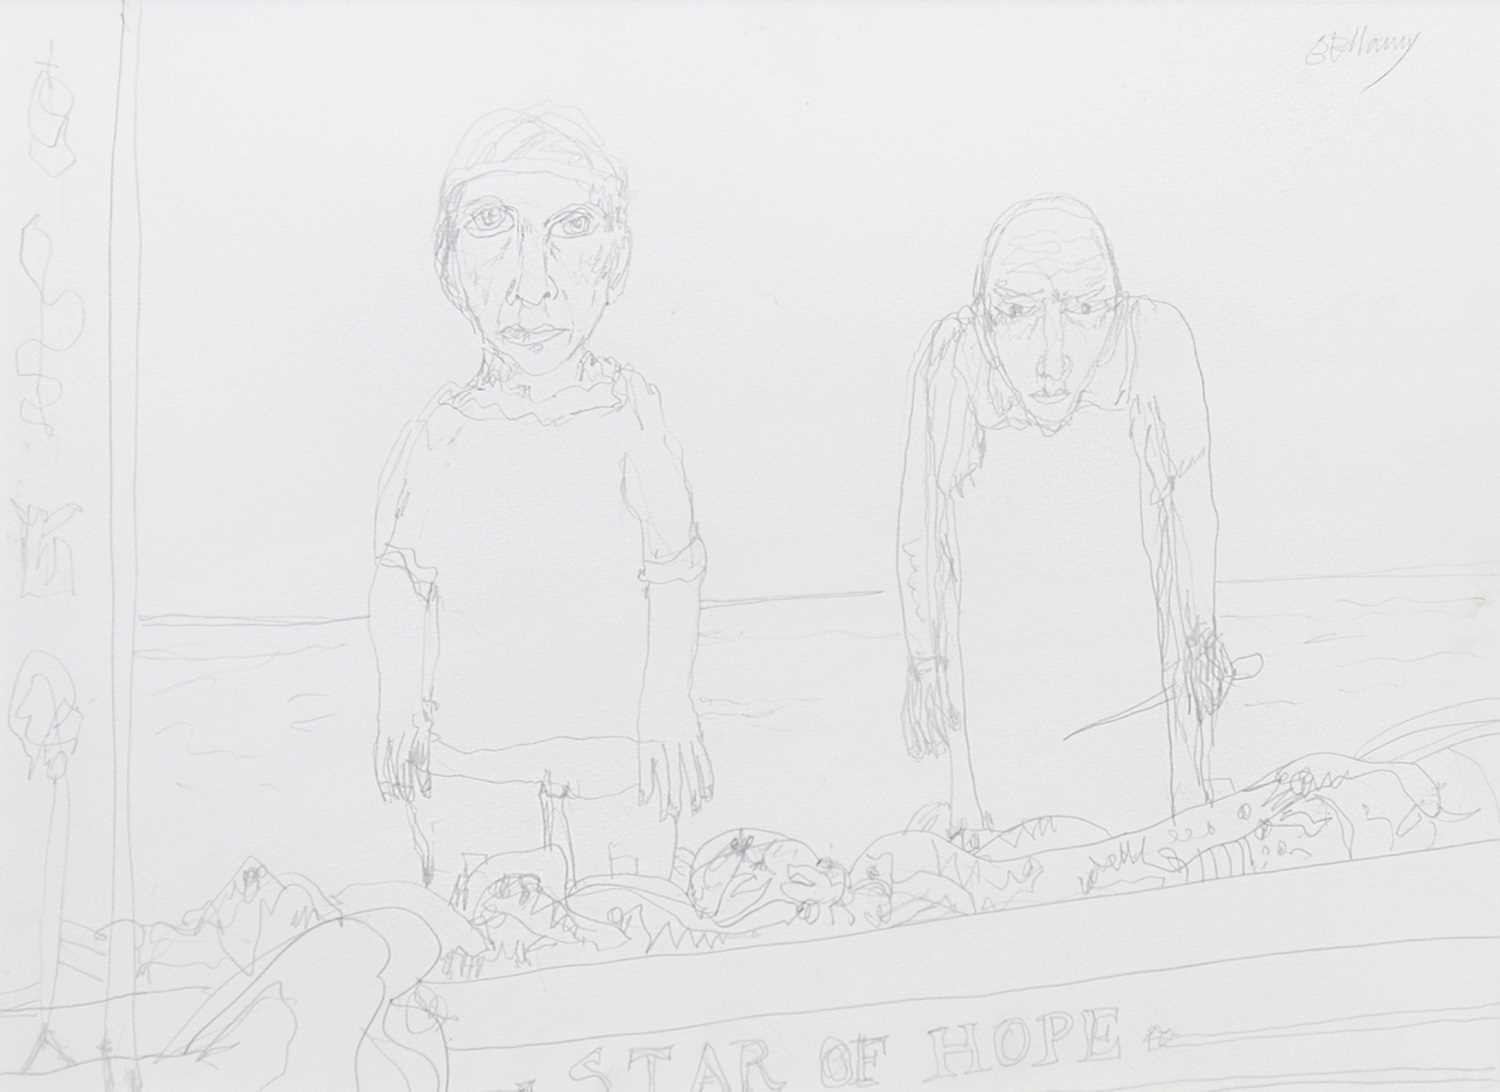 Lot 673 - STAR OF HOPE, A PENCIL SKETCH BY JOHN BELLANY